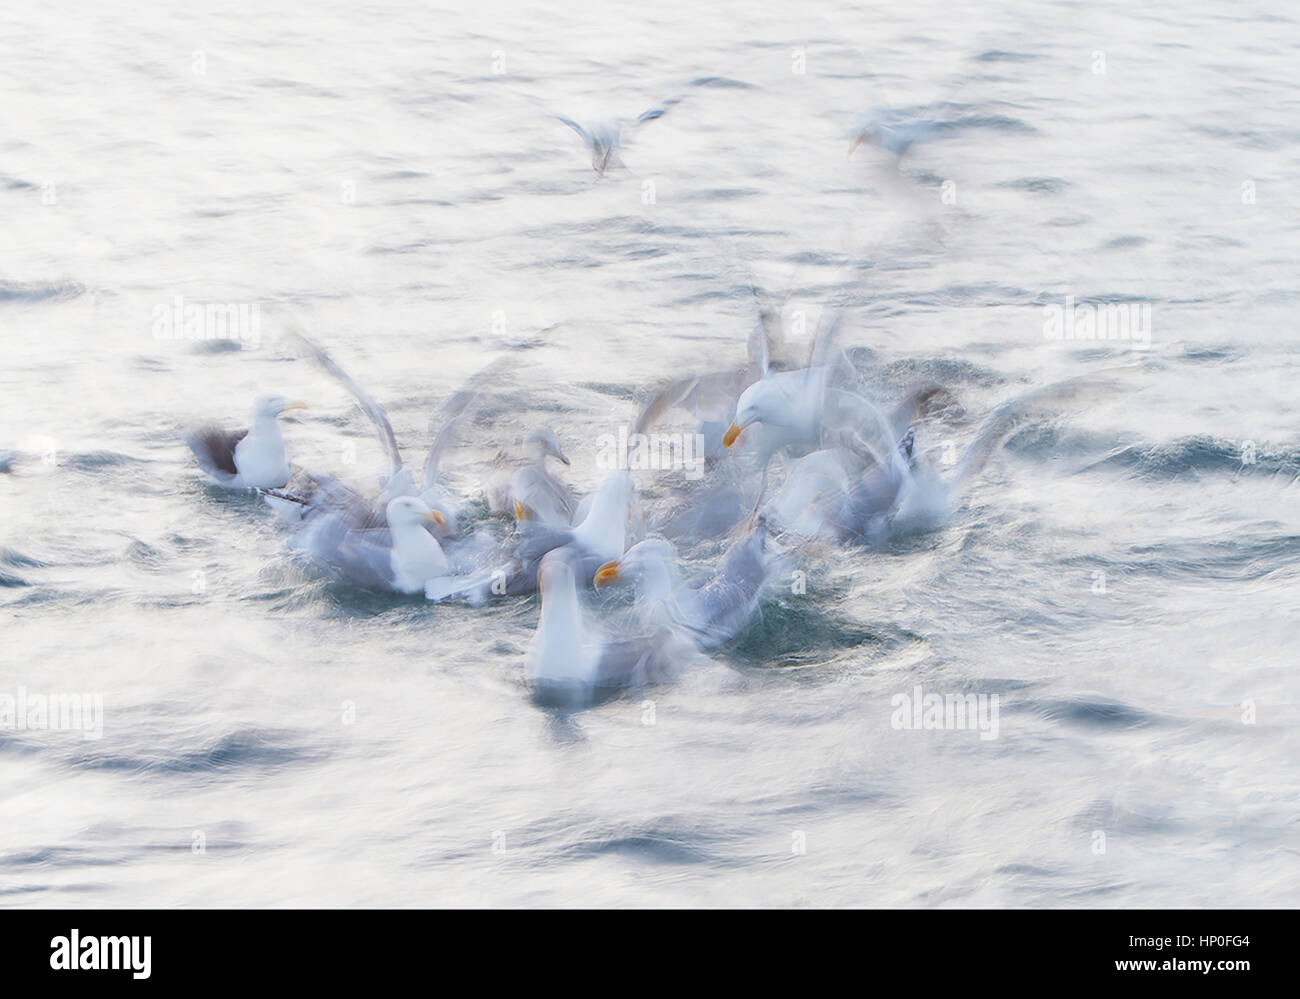 Slow shutter speed shot of a group of herring gulls (Larus argentatus) diving and fighting for food on the surface of the sea Stock Photo